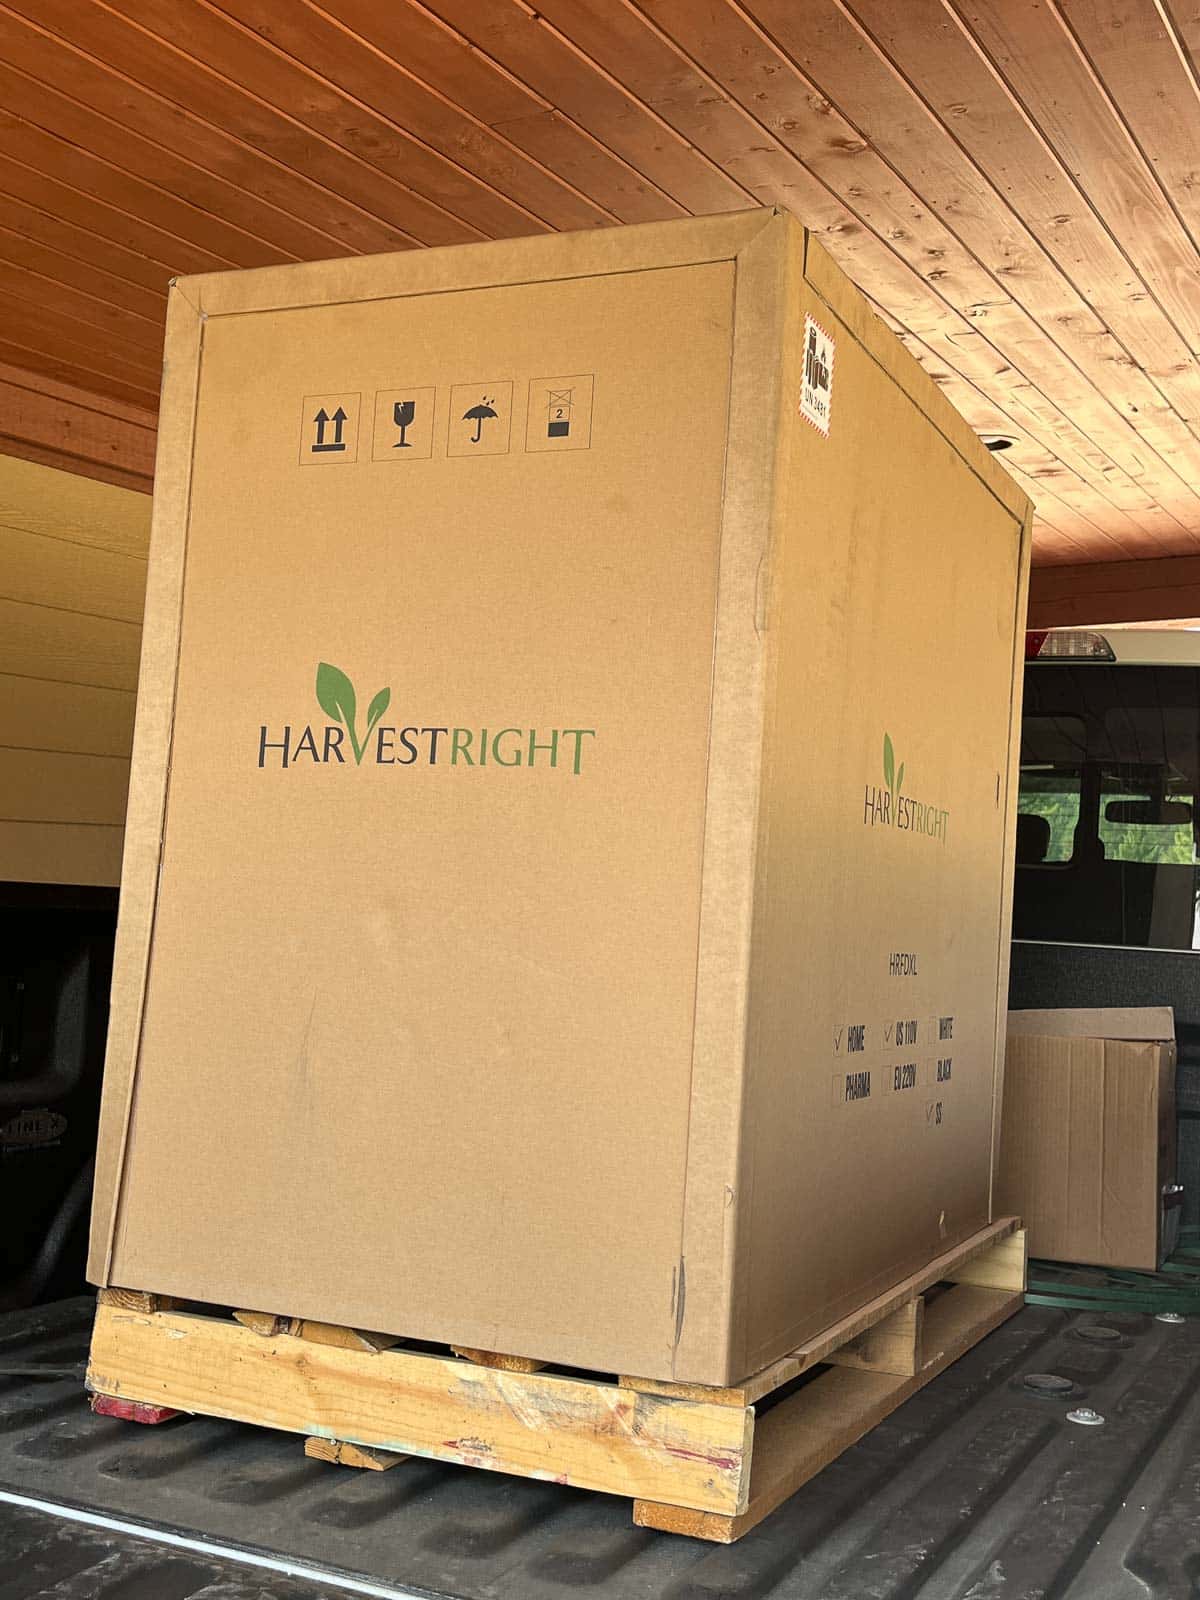 harvest right freeze dryer in a box on a pallet